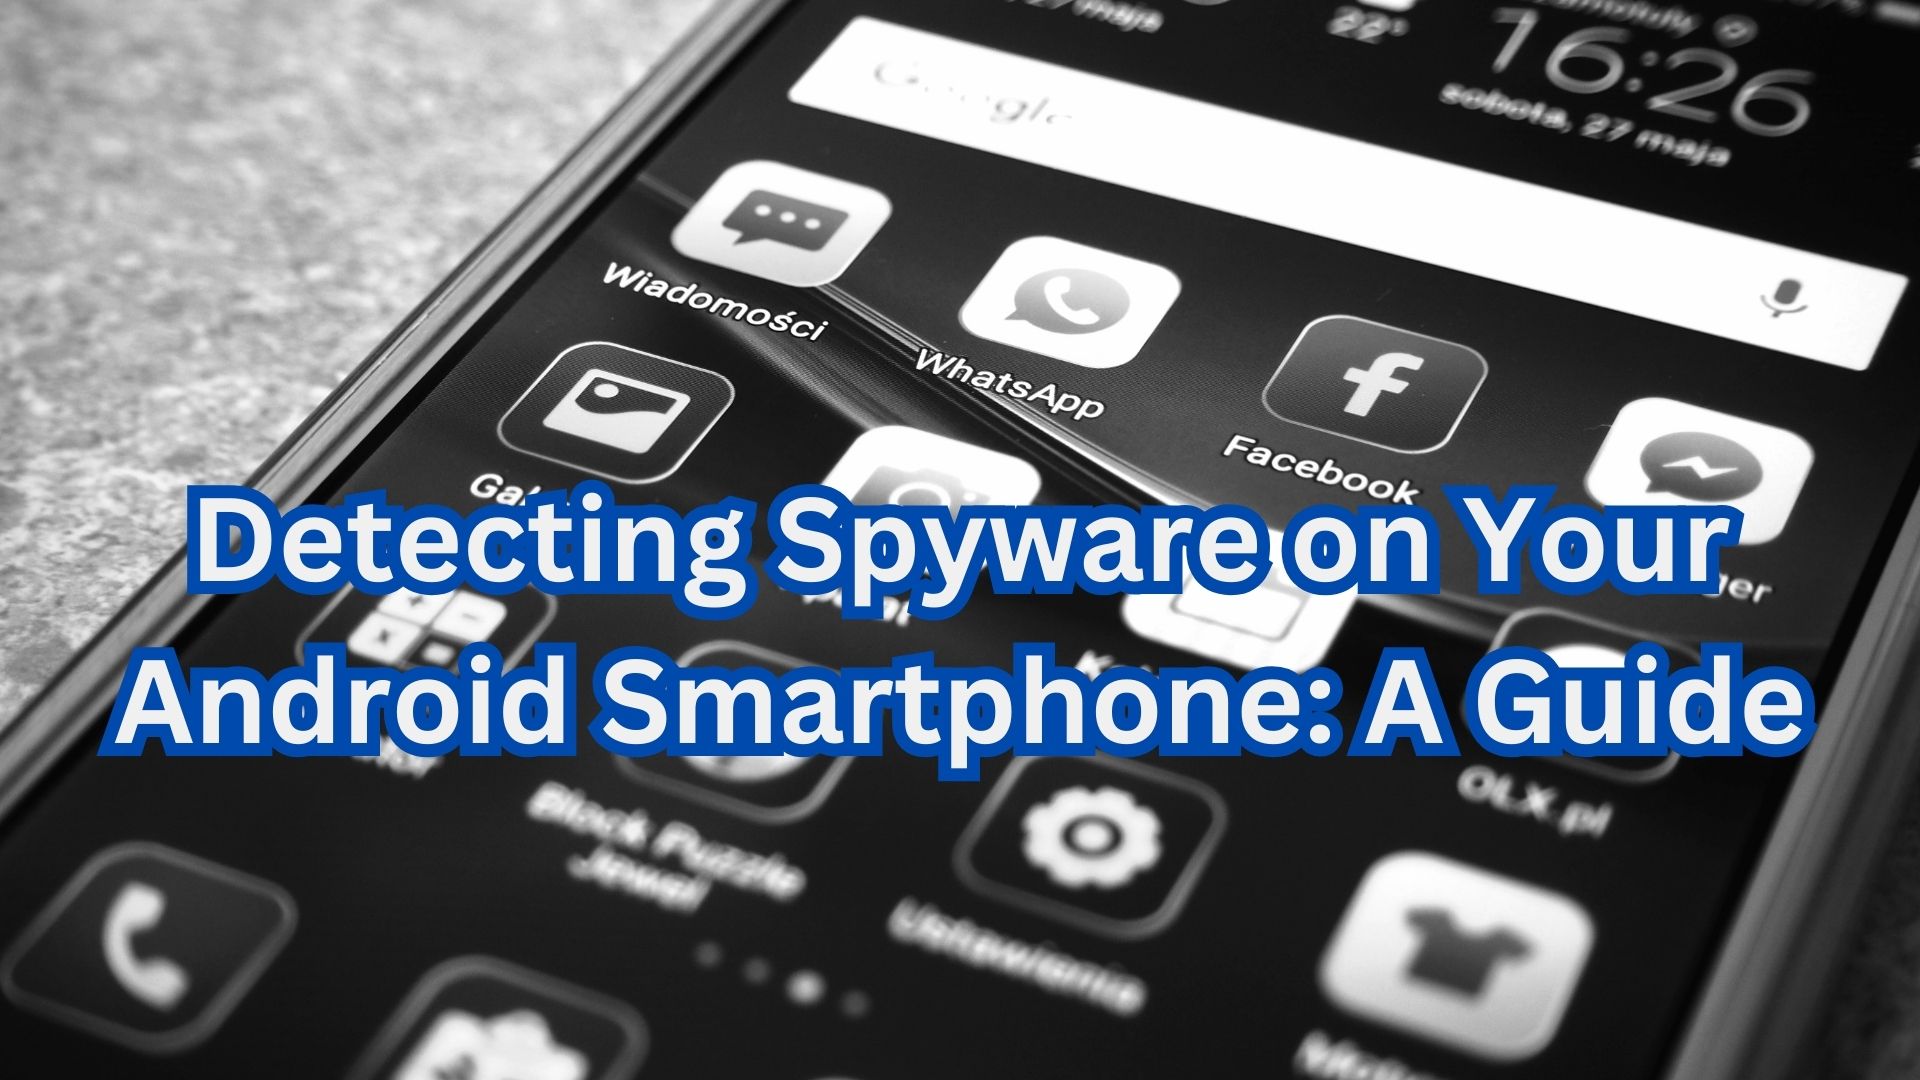 Detecting Spyware on Your Android Smartphone: A Guide